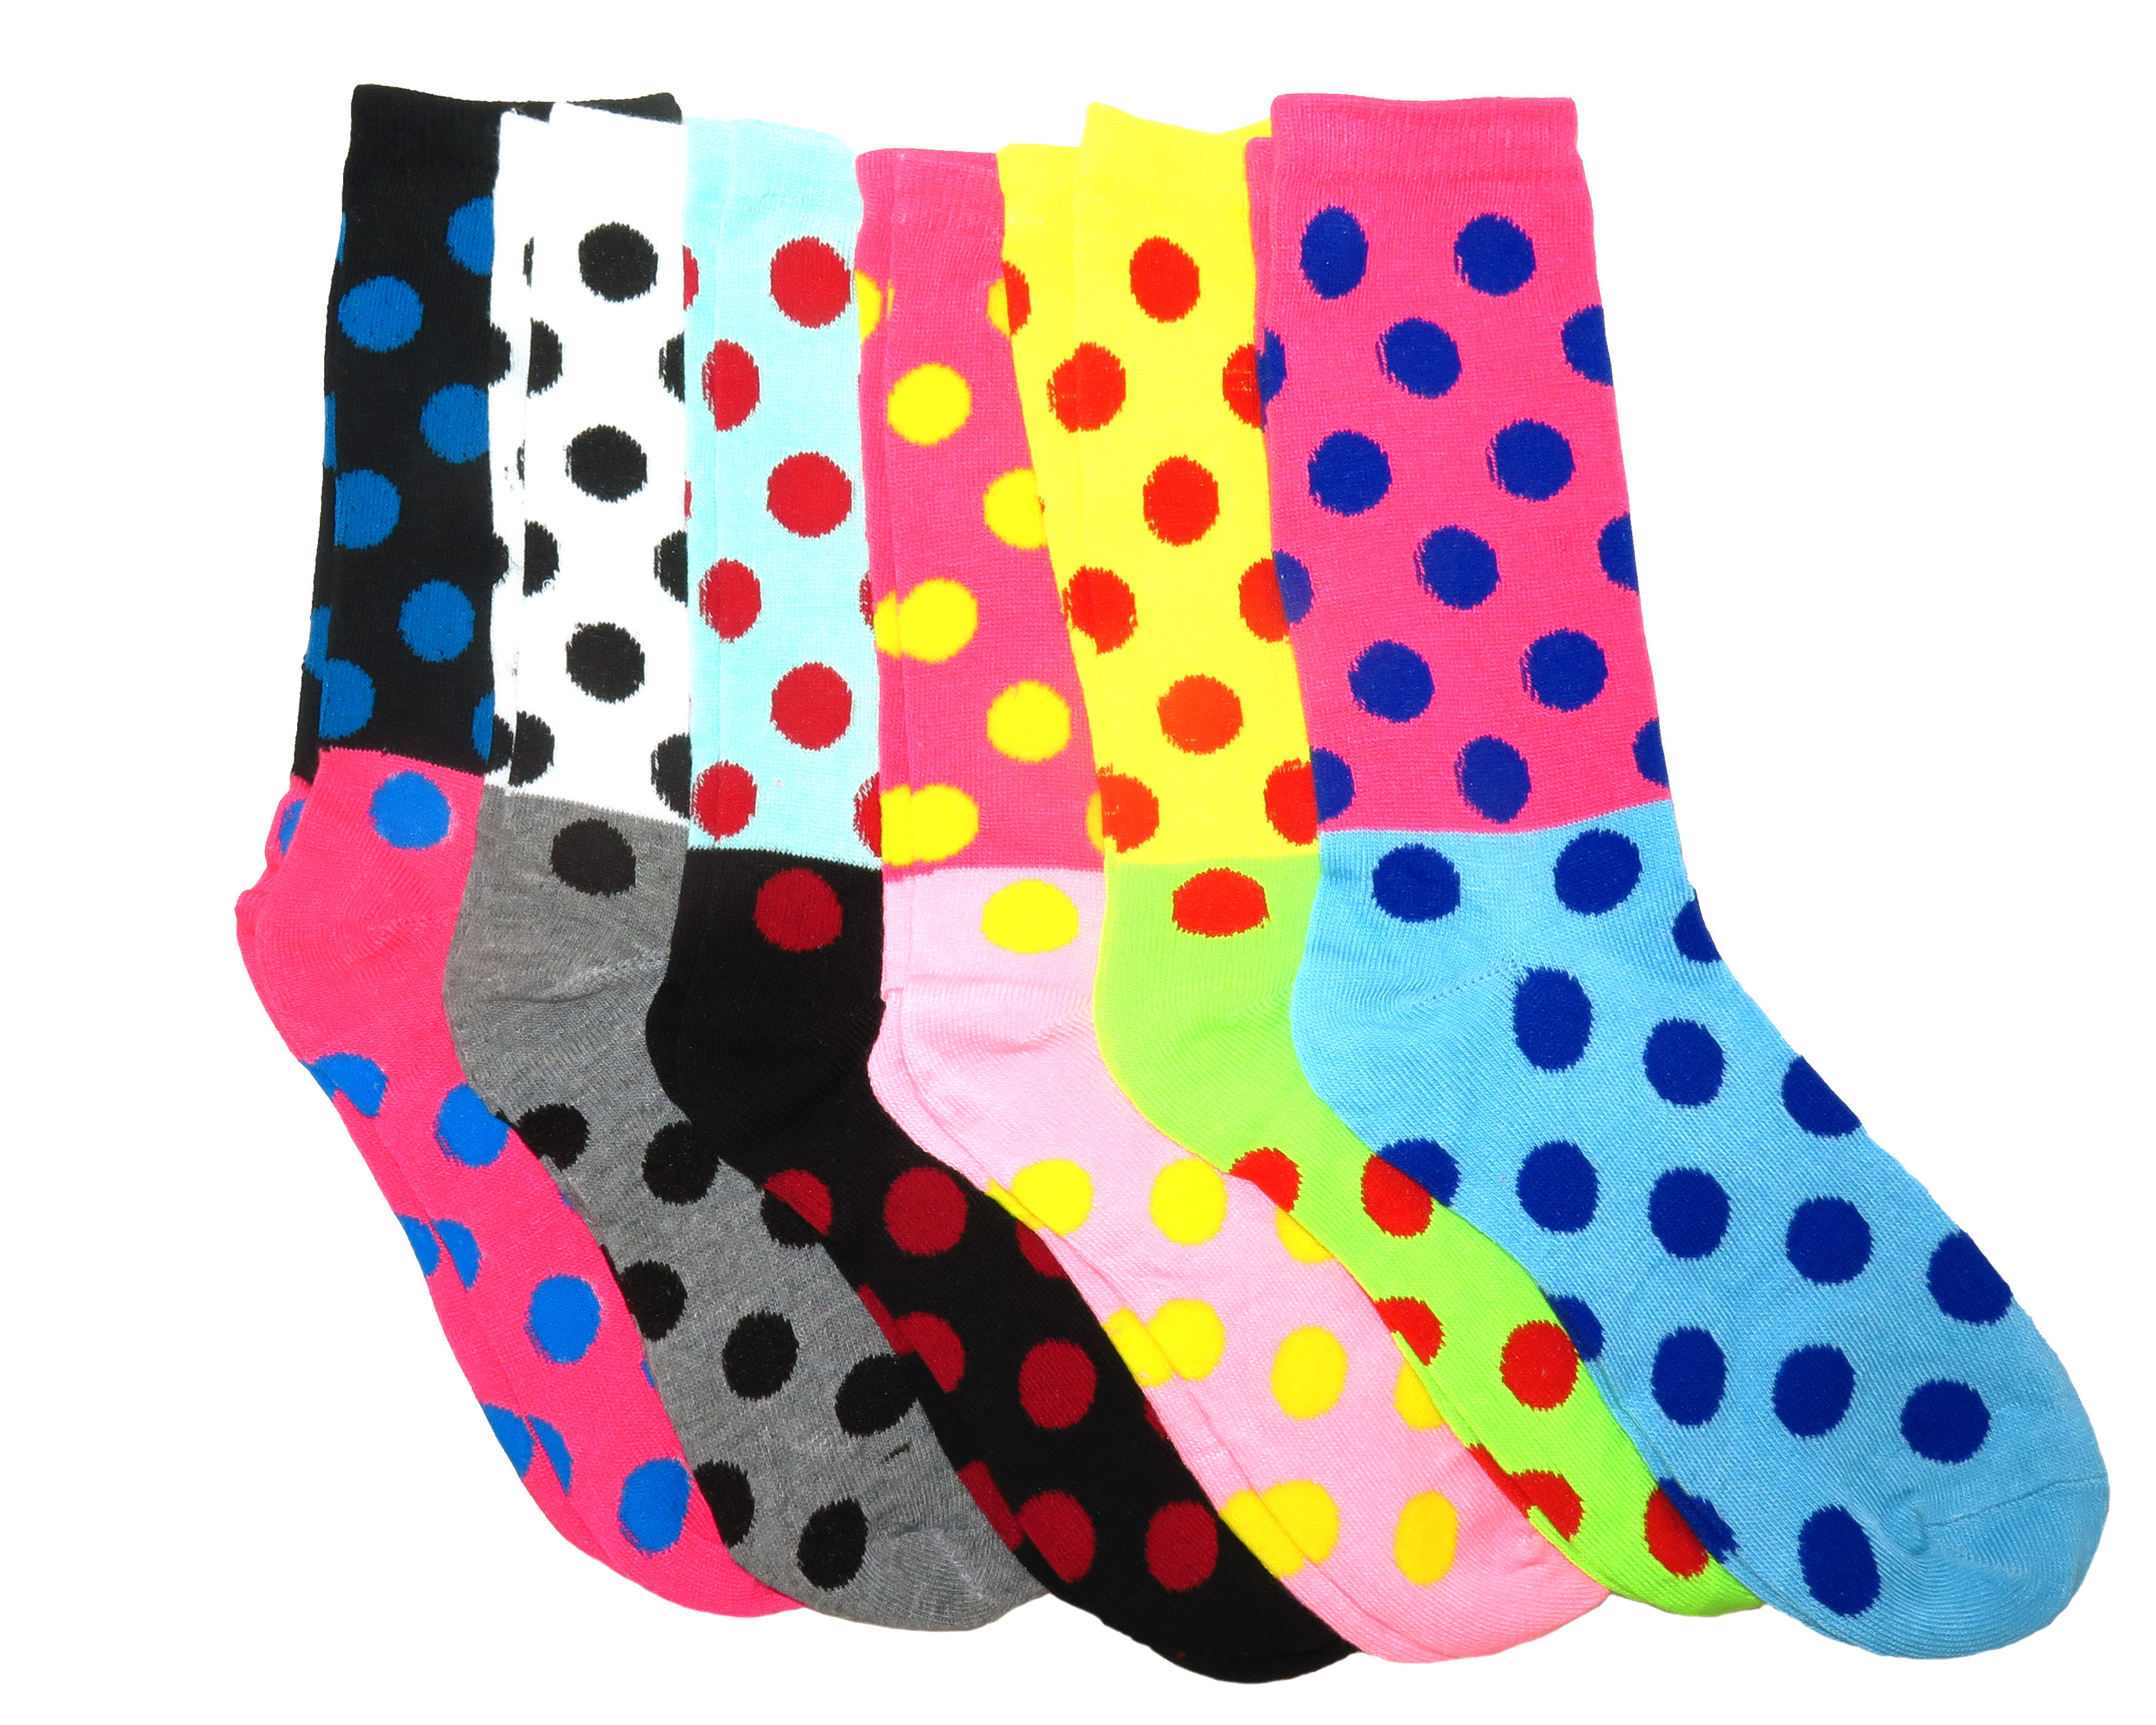 Fun & Colorful Two- Tone Polka Dot Assorted 6 Pack Crew Socks - image 1 of 3